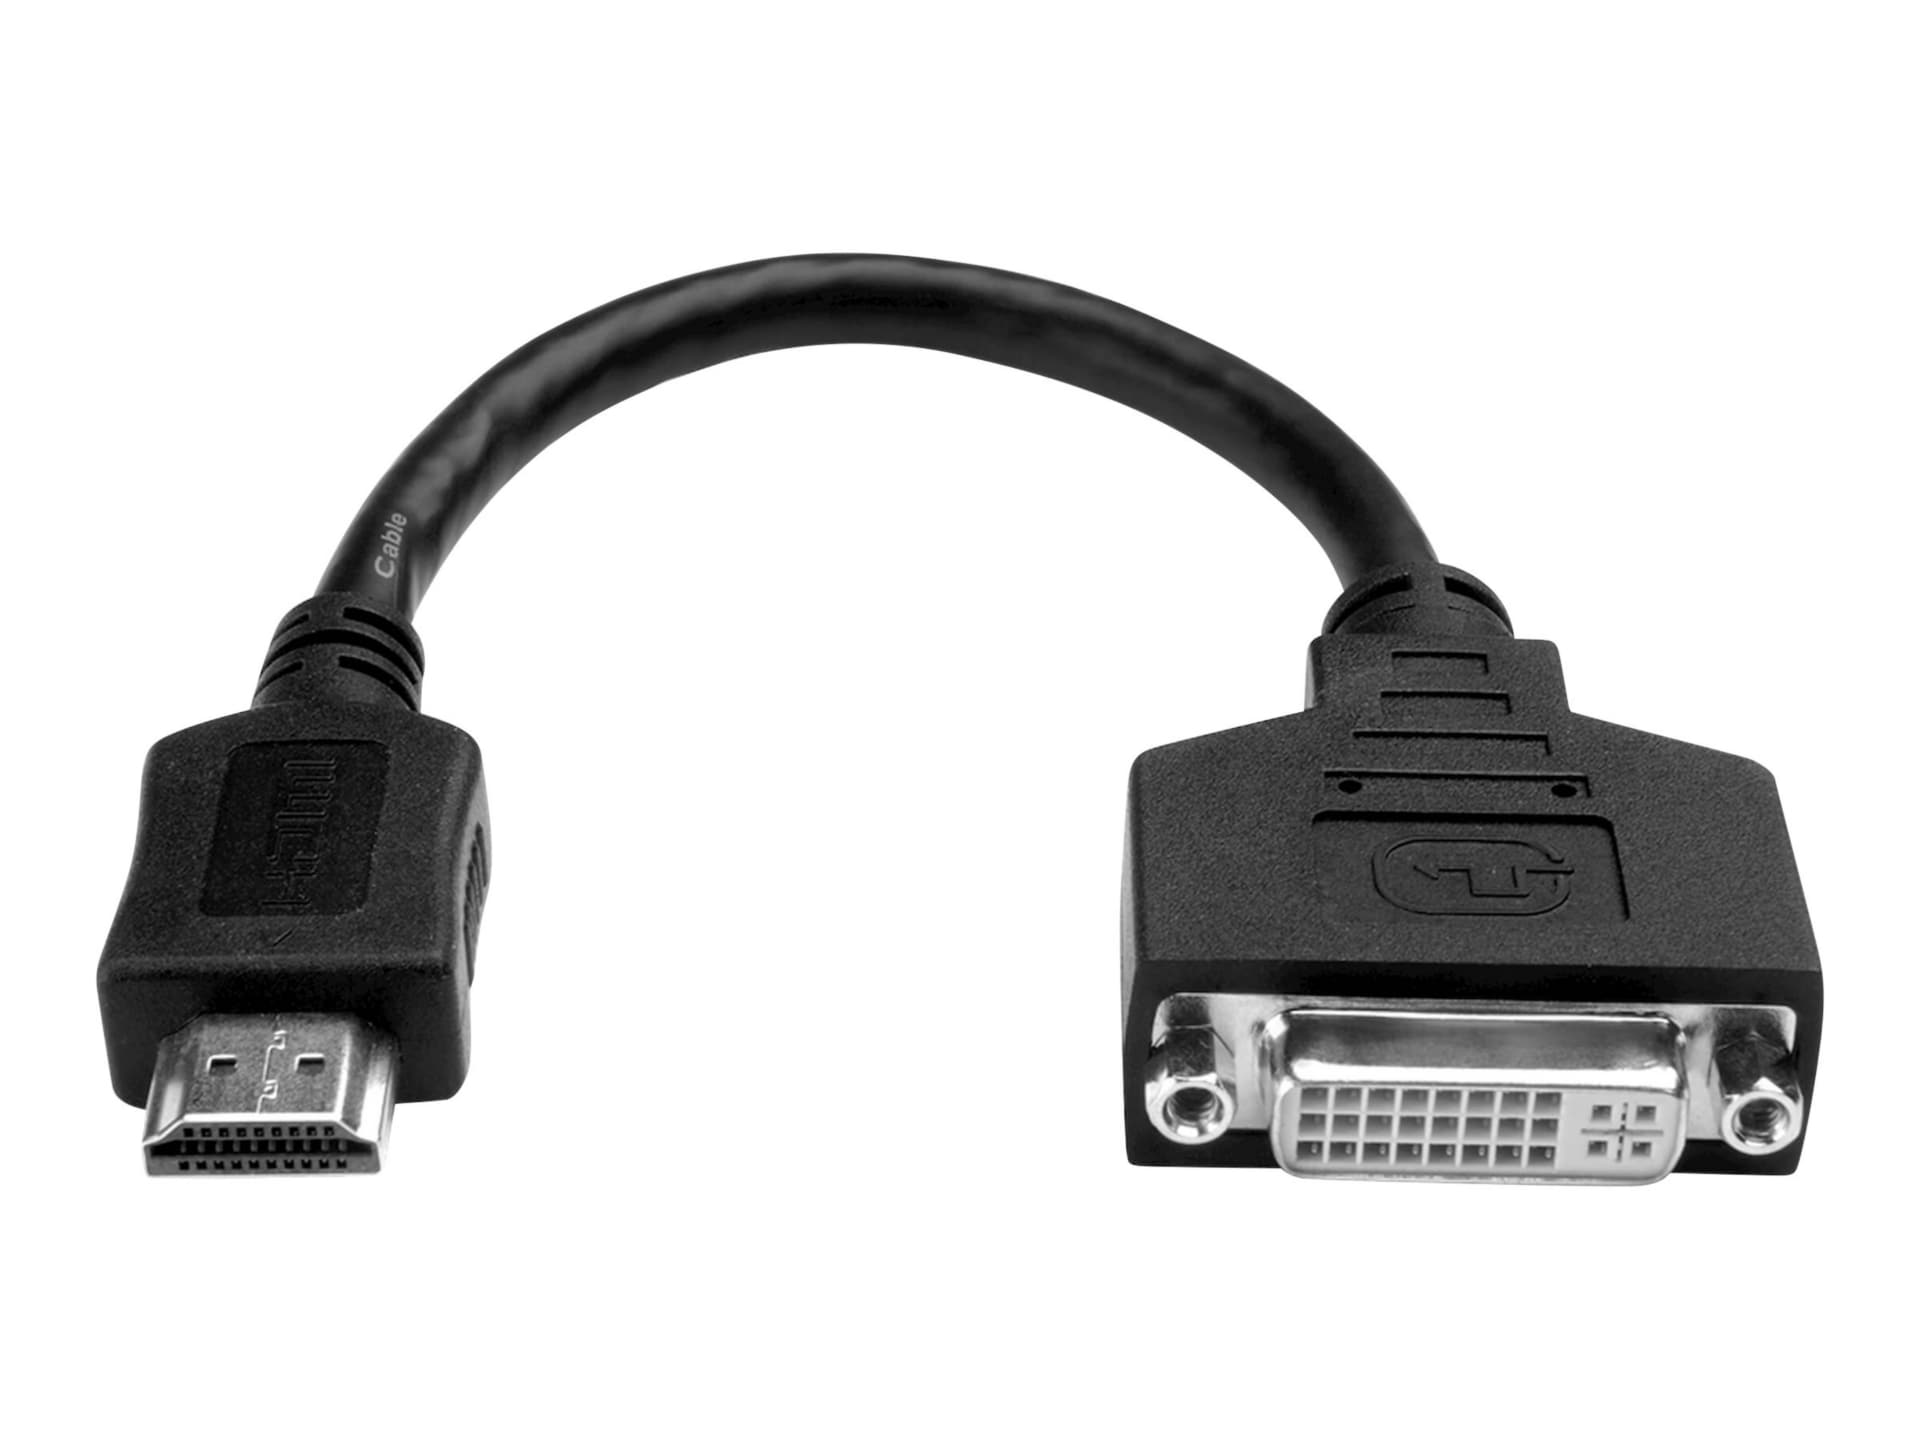 HDMI – DVI  Cables, adapters and converters